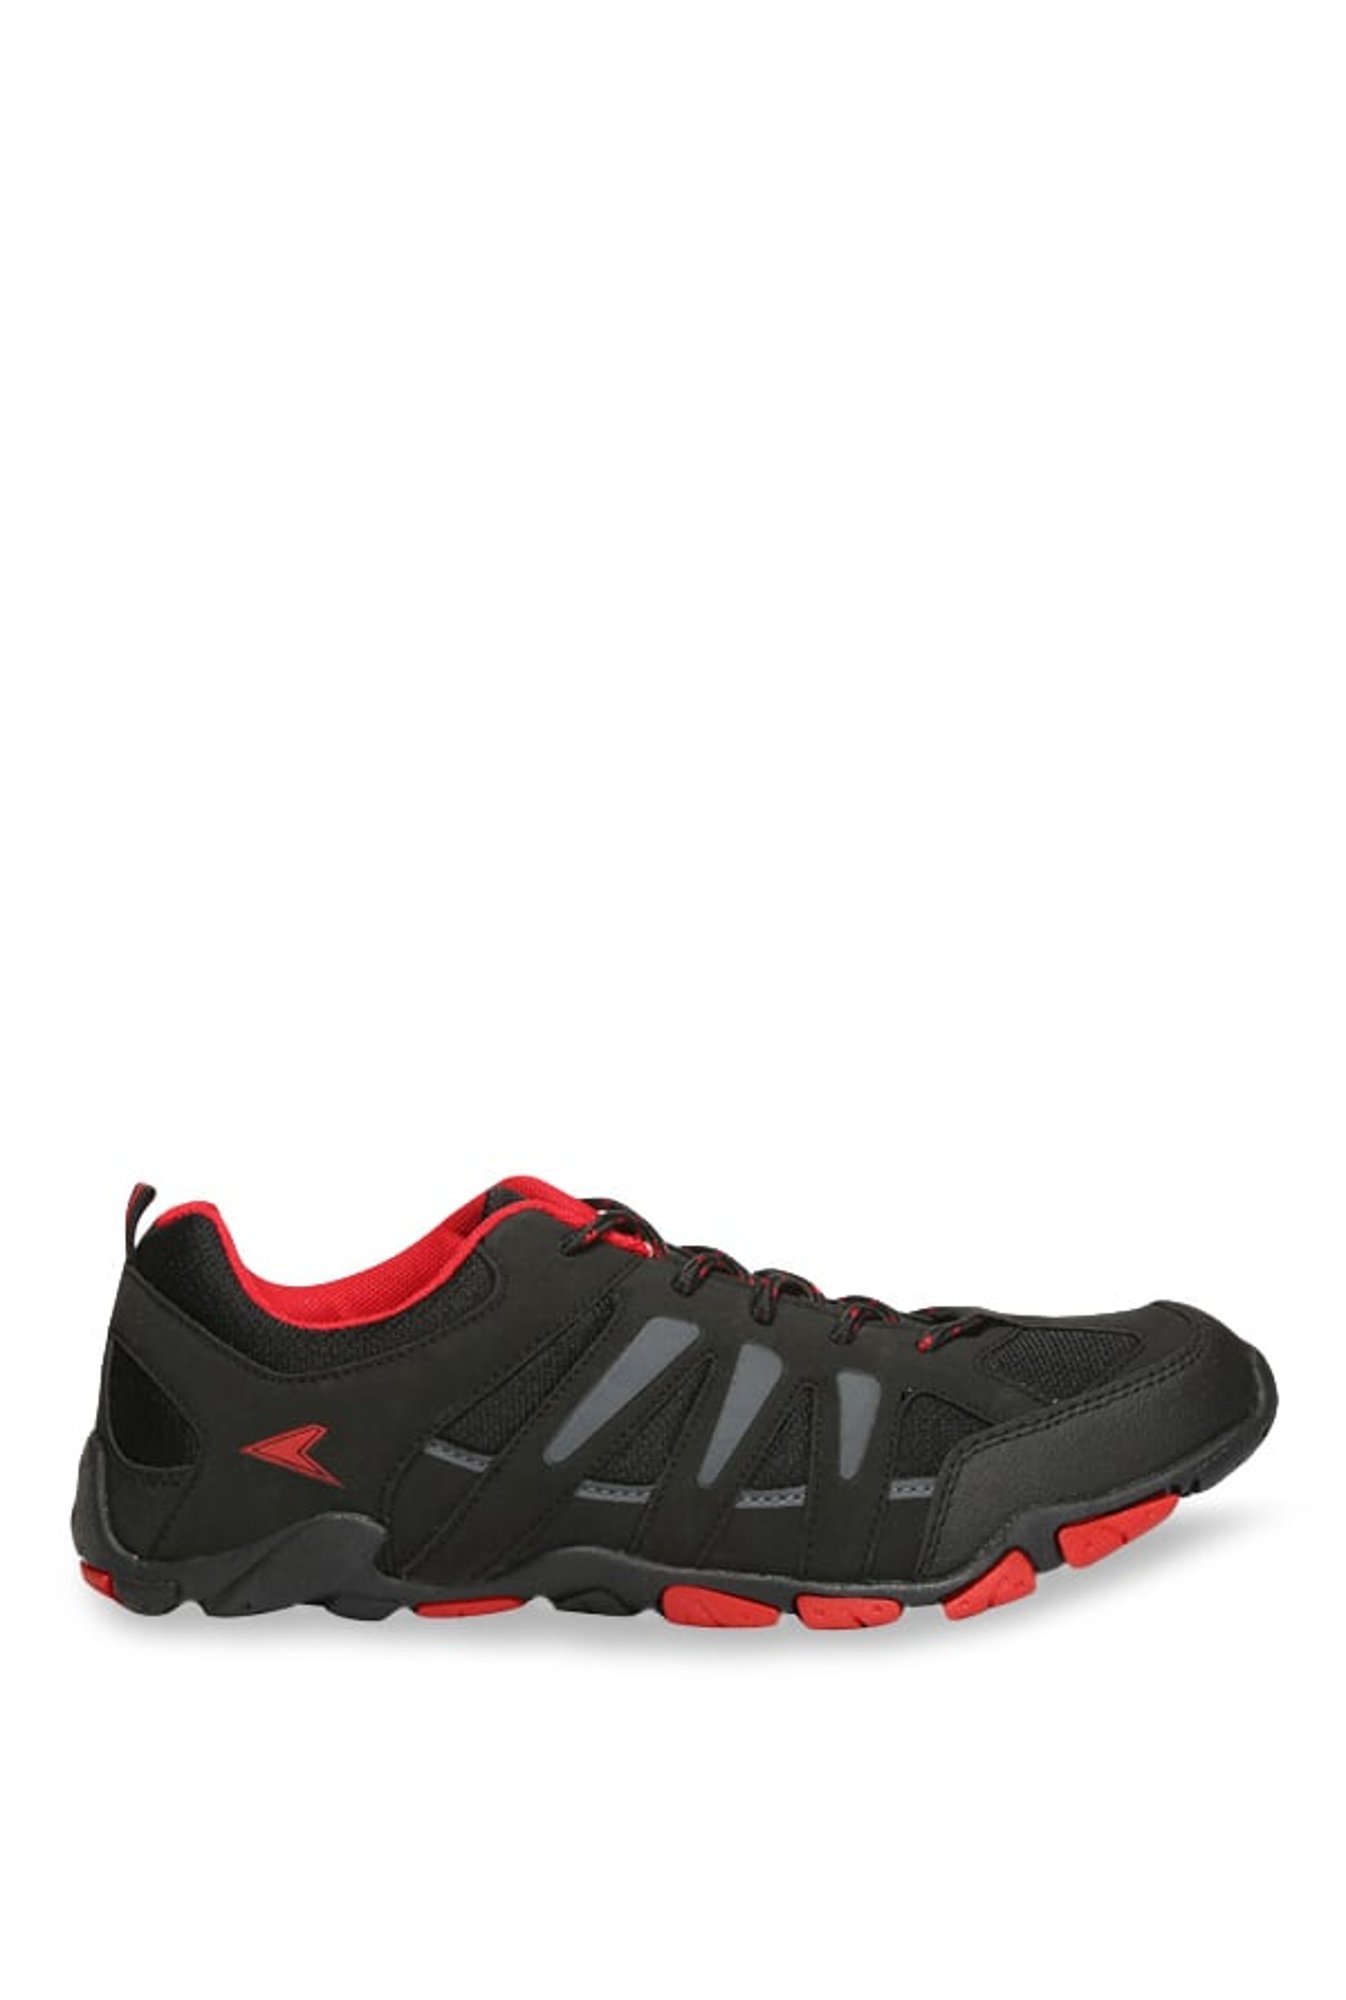 Power Lionel Black \u0026 Red Outdoor Shoes 